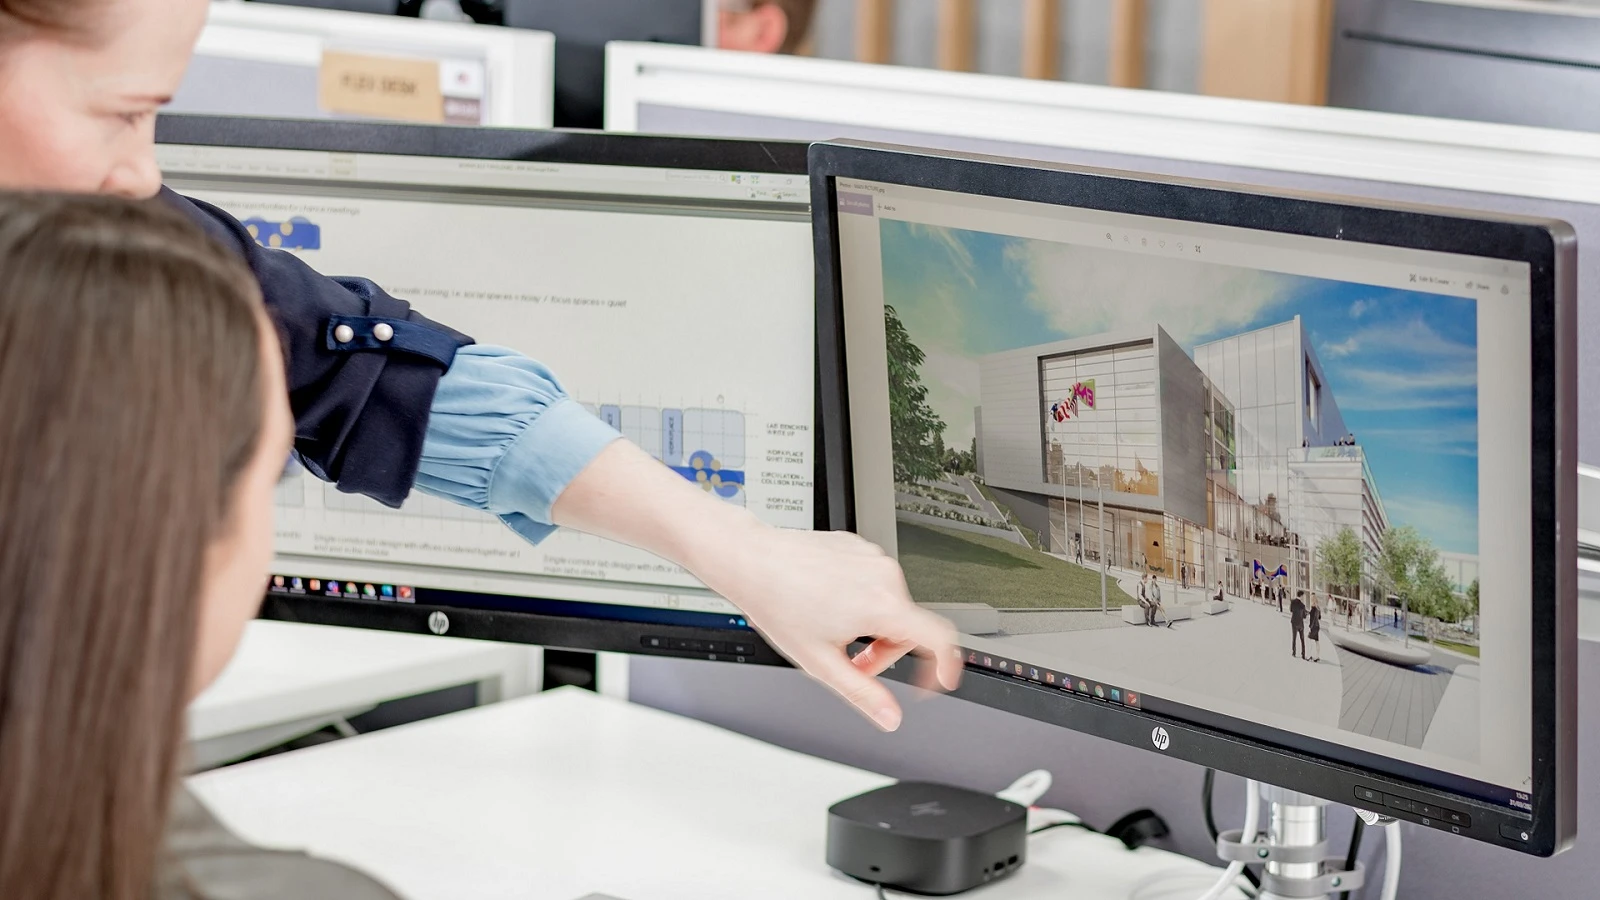 Office workers review a building design on a dual-monitor setup.